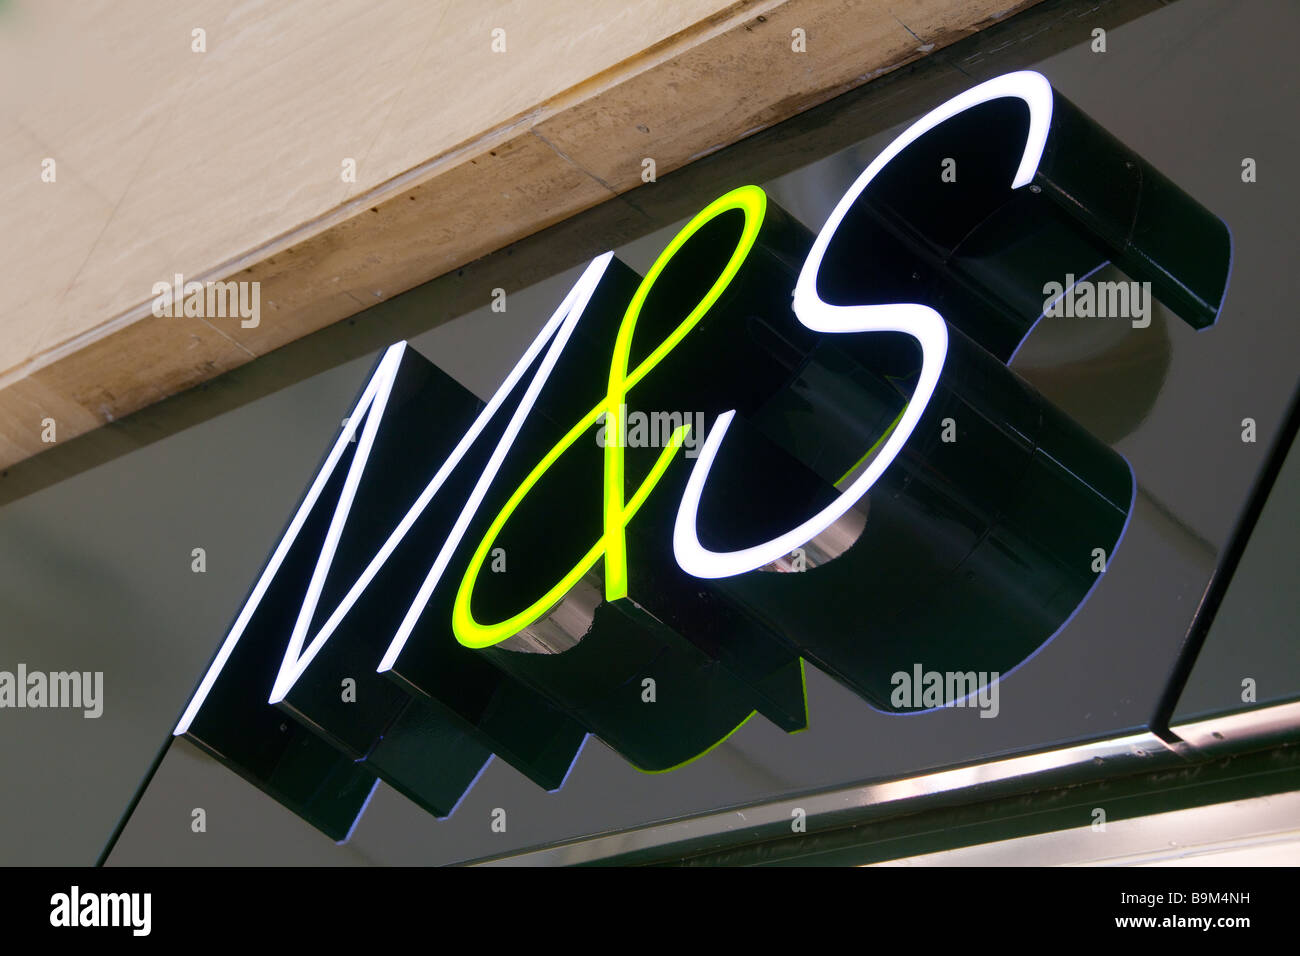 Marks and Spencer company logo of initials M&S on the front of the shop building Stock Photo